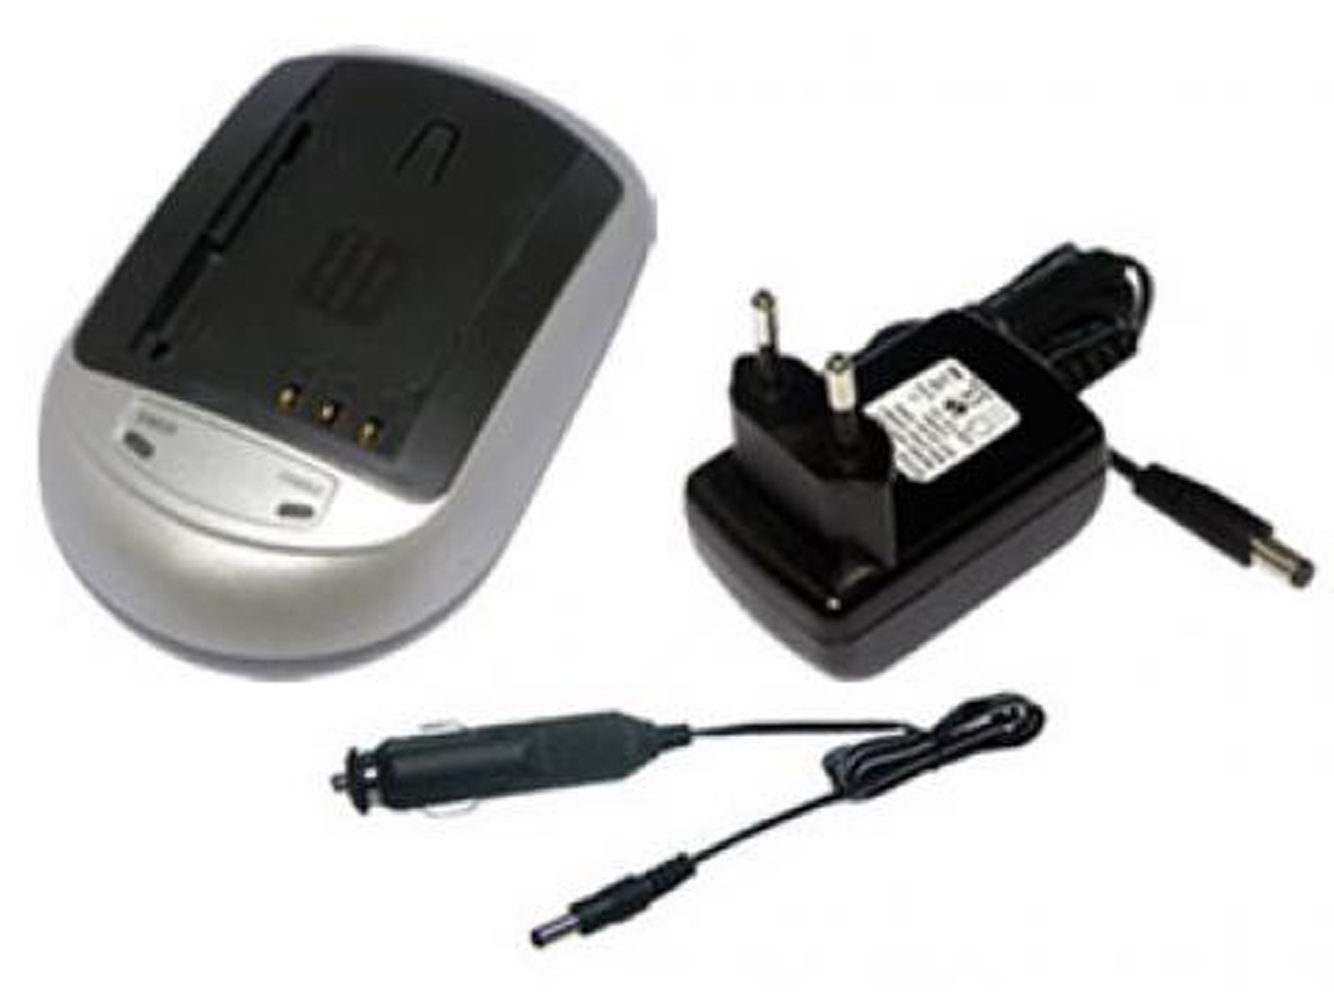 Olympus Blm-1, Ps-blm1 Battery Chargers For Olympus C-5060 Wide Zoom, Olympus C-7070 Wide Zoom replacement